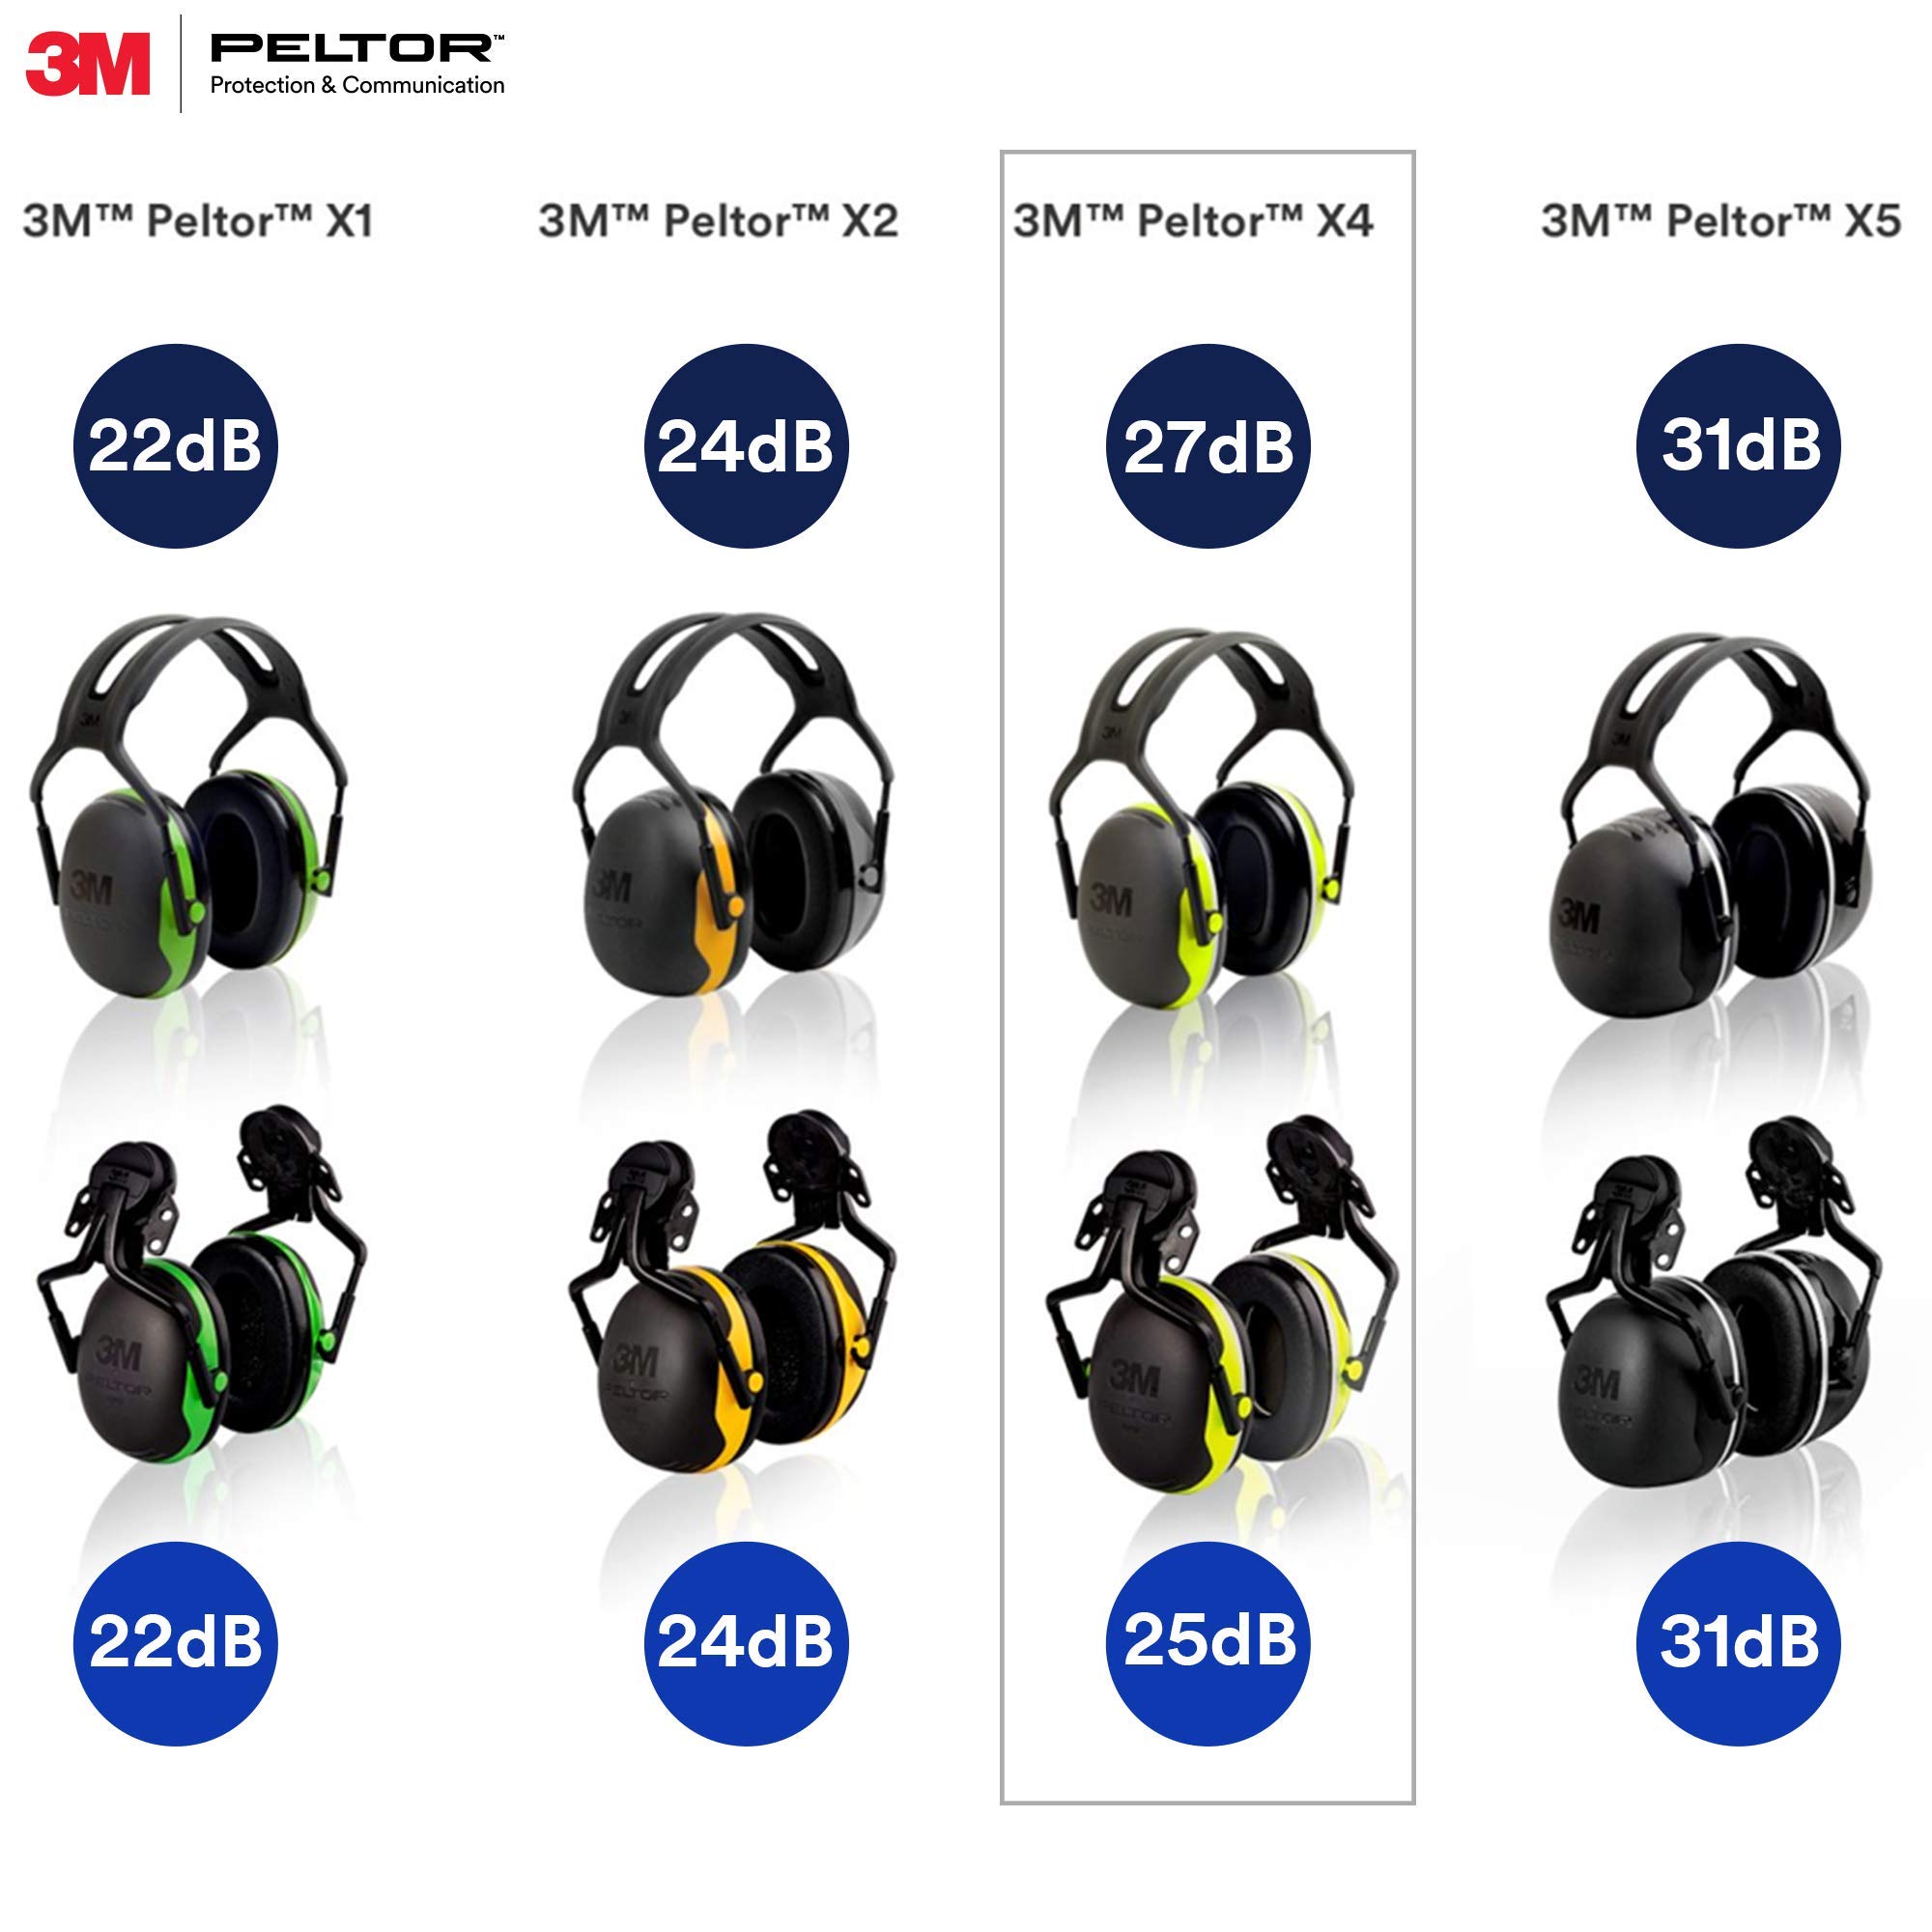 3M Peltor X4A Over-the-Head Ear Muffs, Noise Protection, NRR 27 dB, Construction, Manufacturing, Maintenance, Automotive, Woodworking, Heavy Engineering, Mining